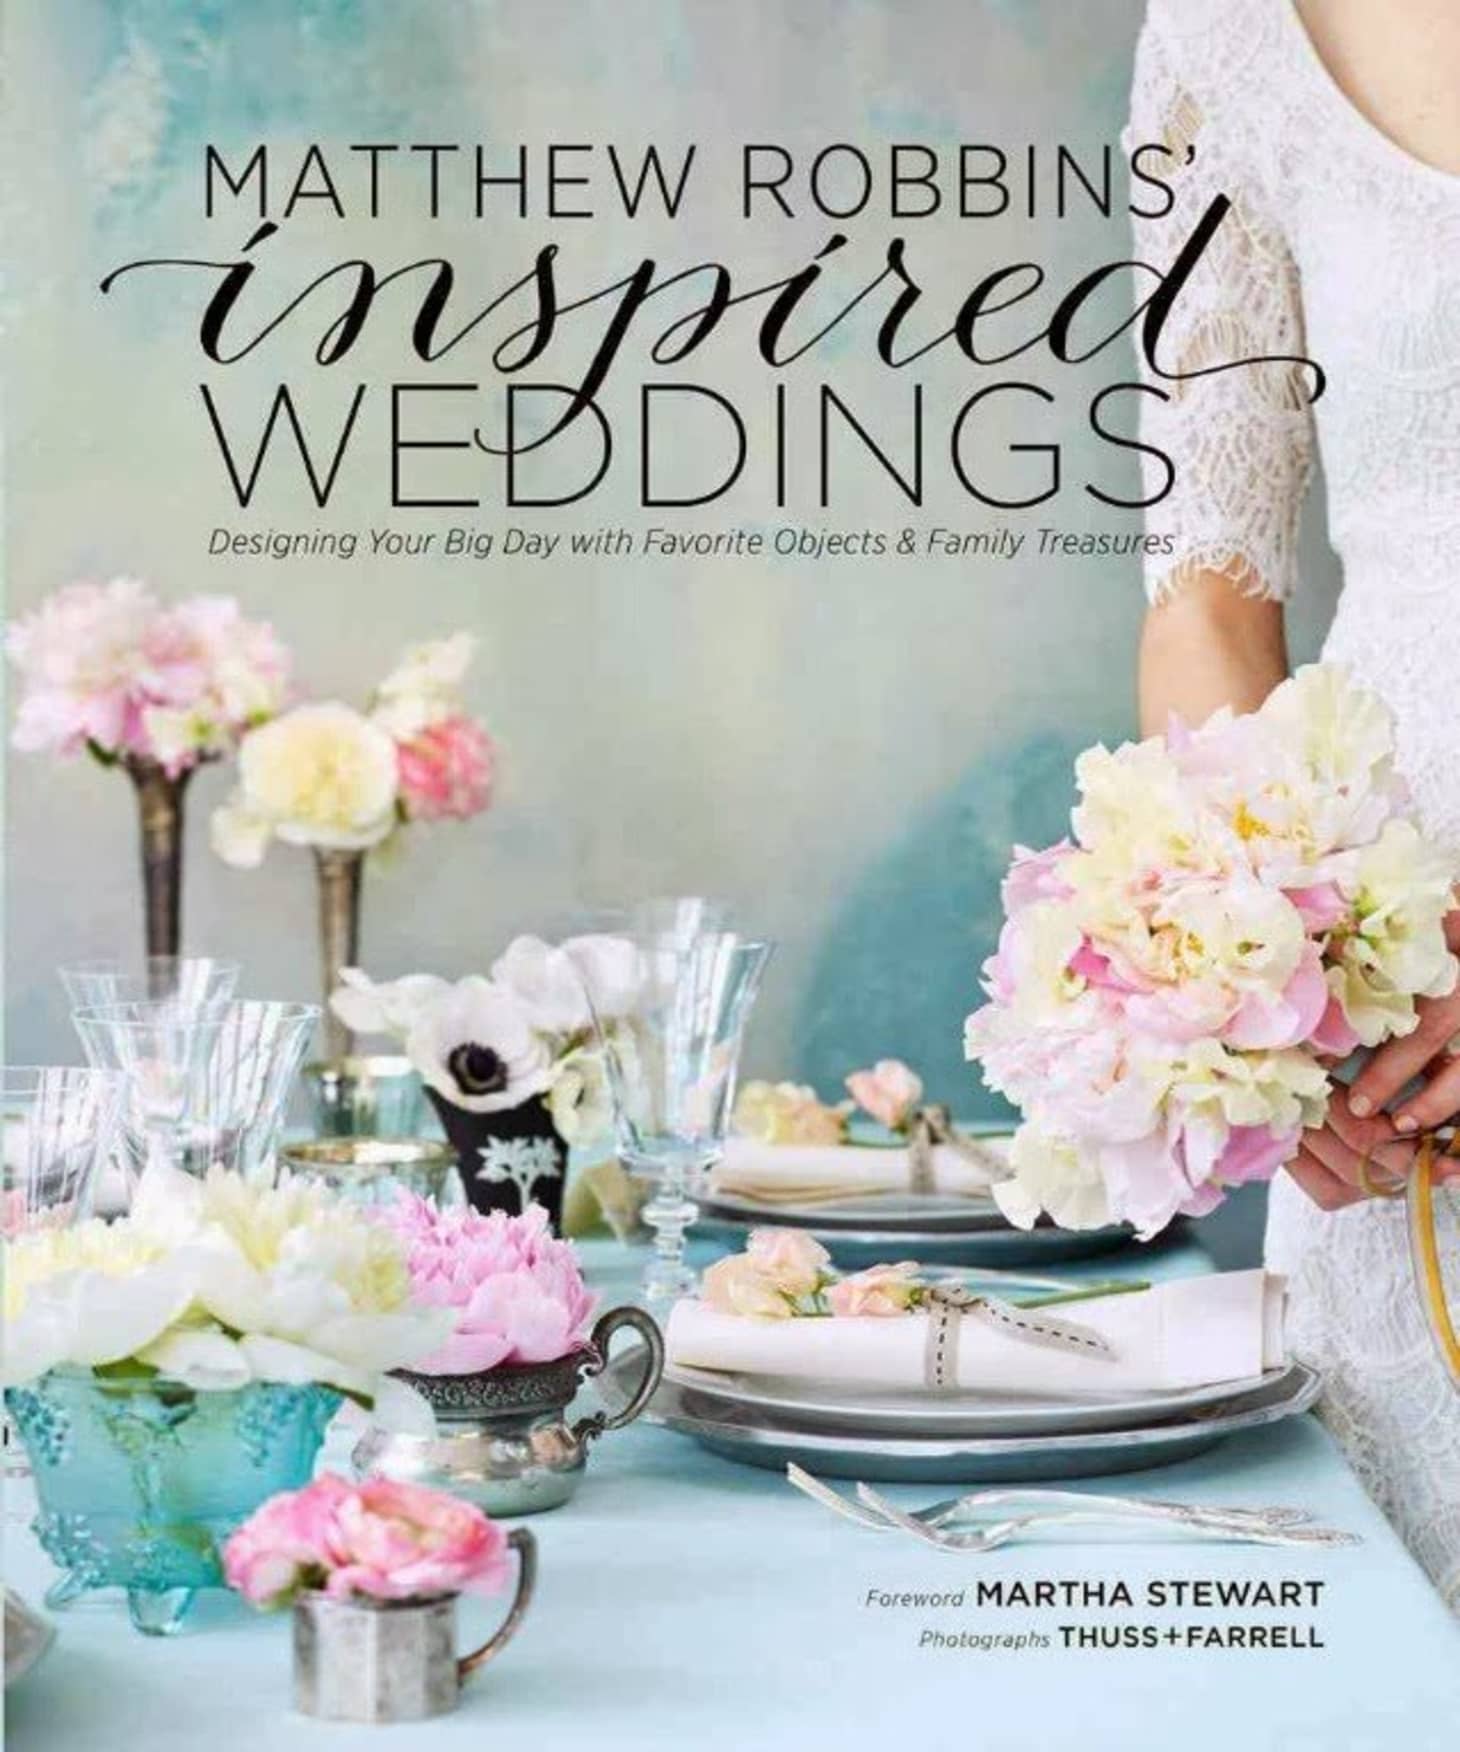 The 10 Best (And Most Beautiful) Wedding Books to Add to ...